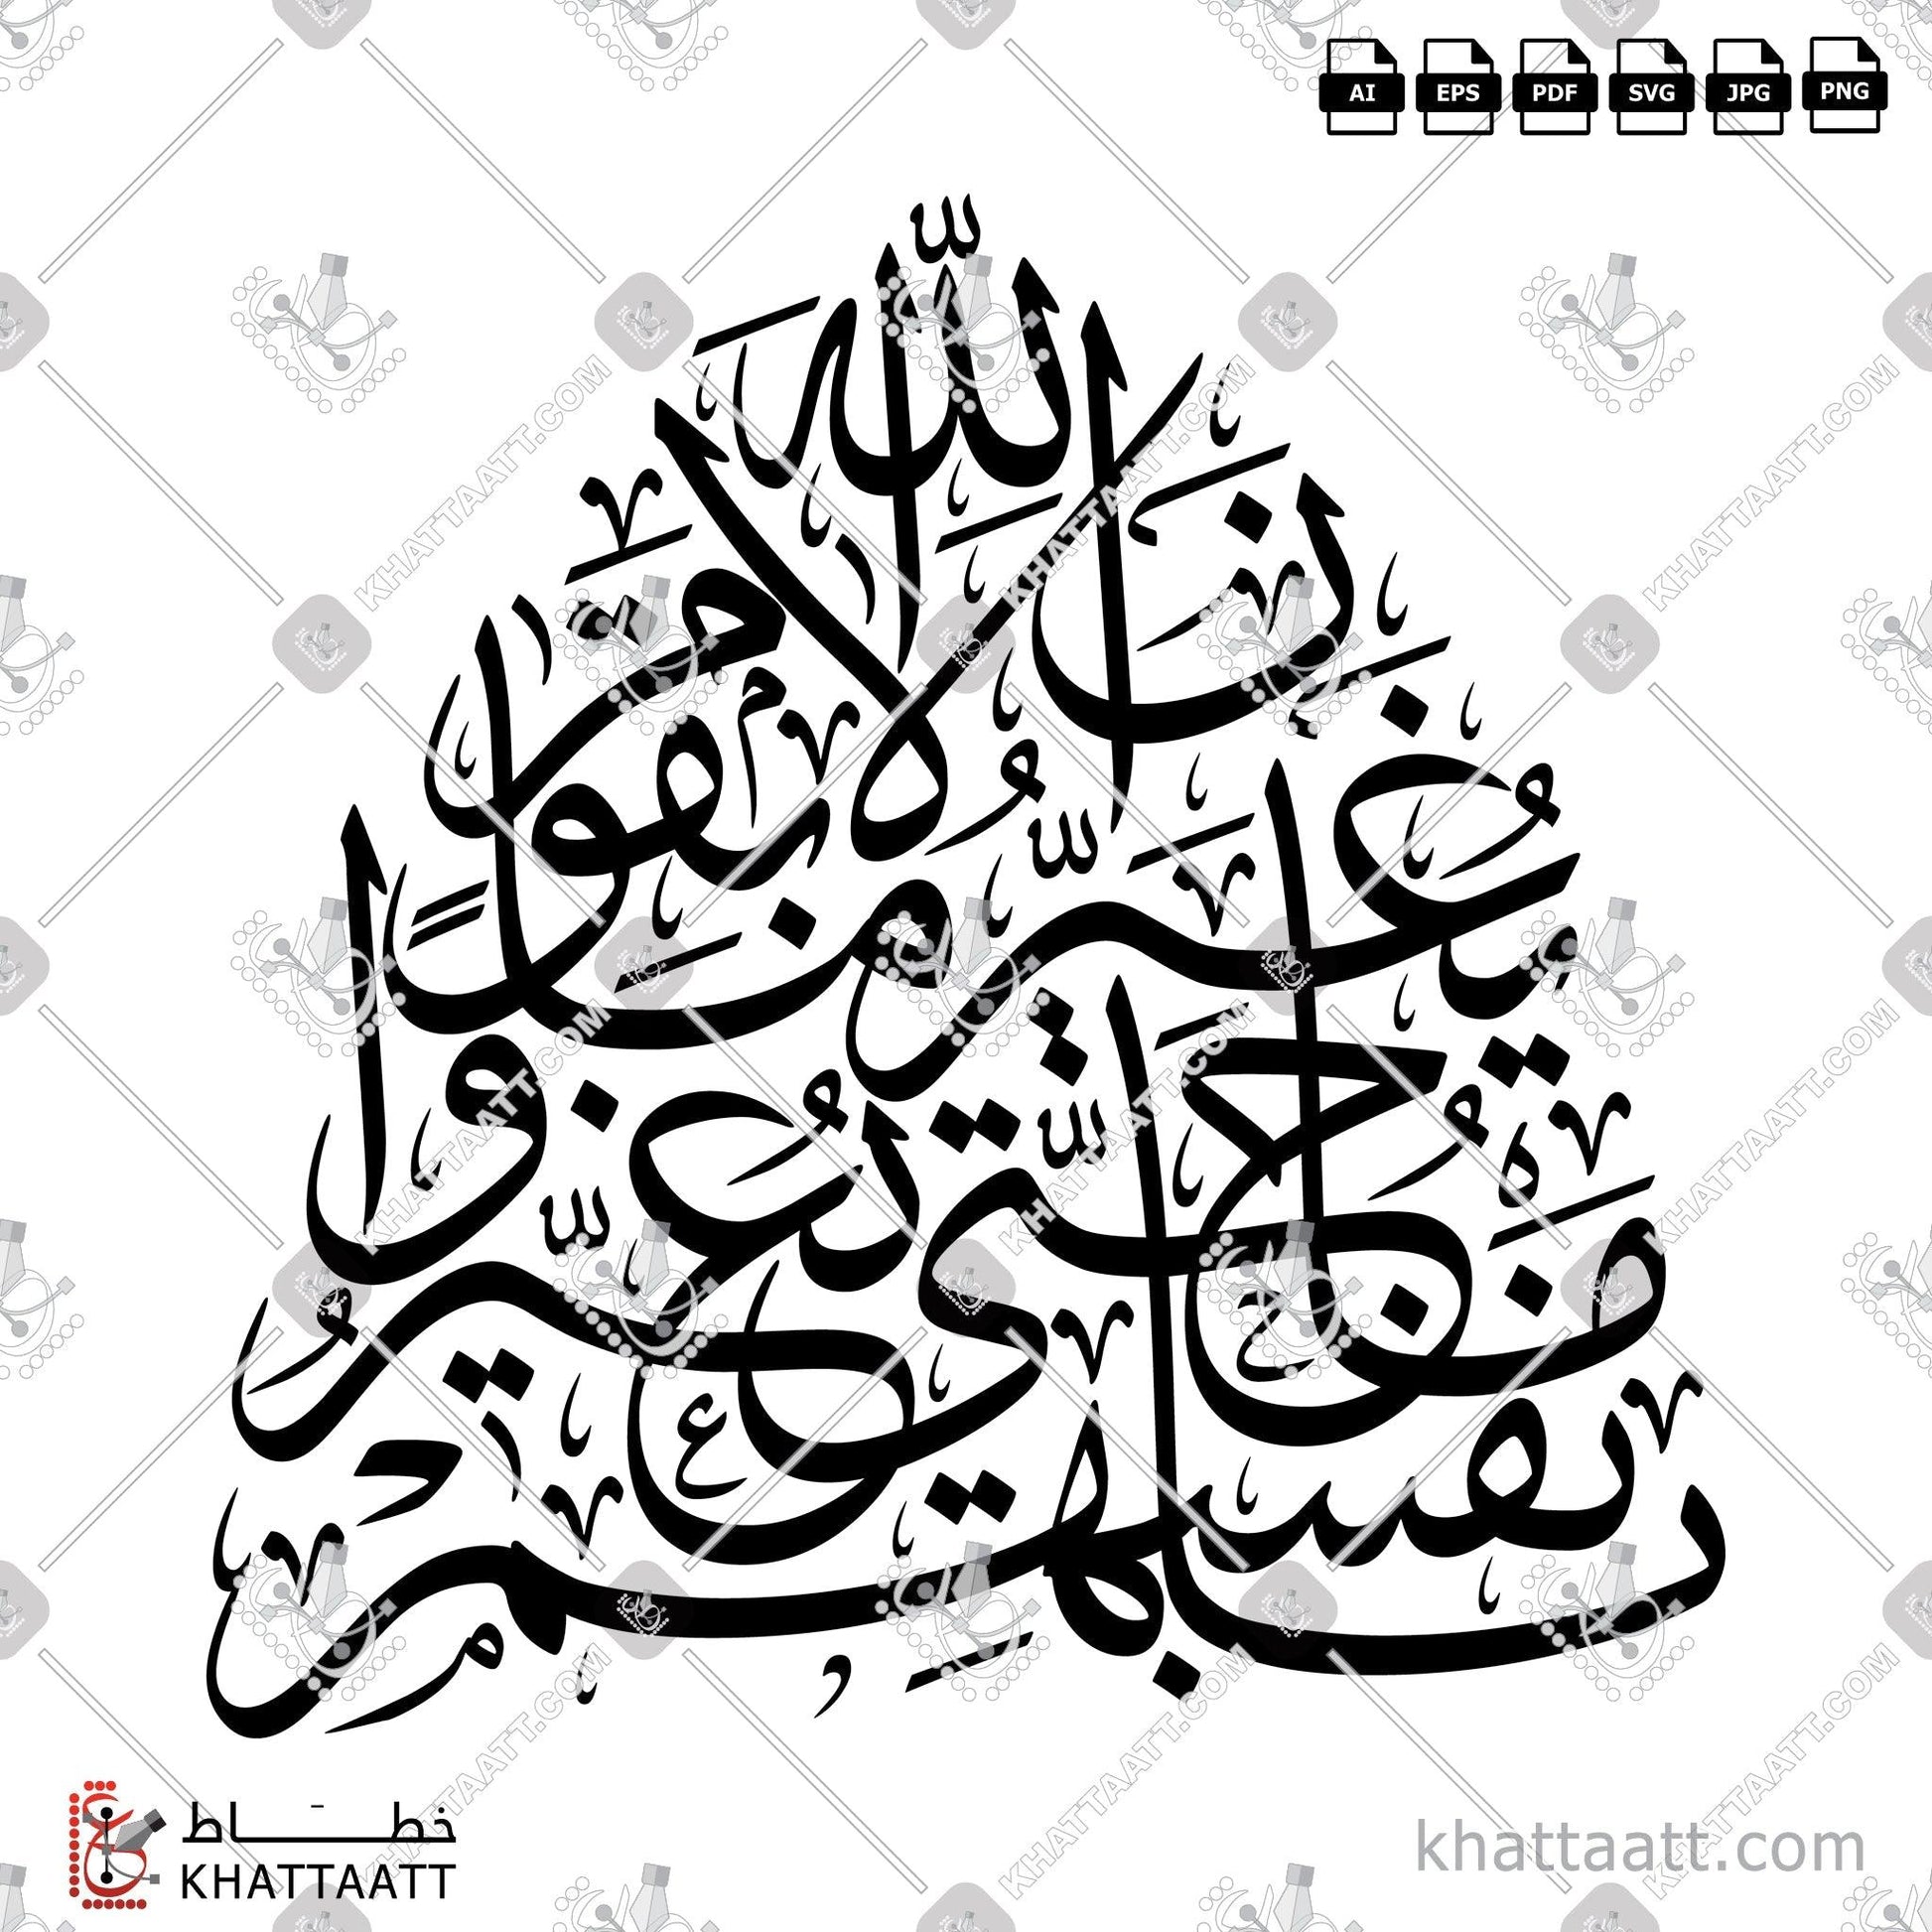 Download Arabic Calligraphy of إن الله لا يغير ما بقوم حتى يغيروا ما بأنفسهم in Thuluth - خط الثلث in vector and .png